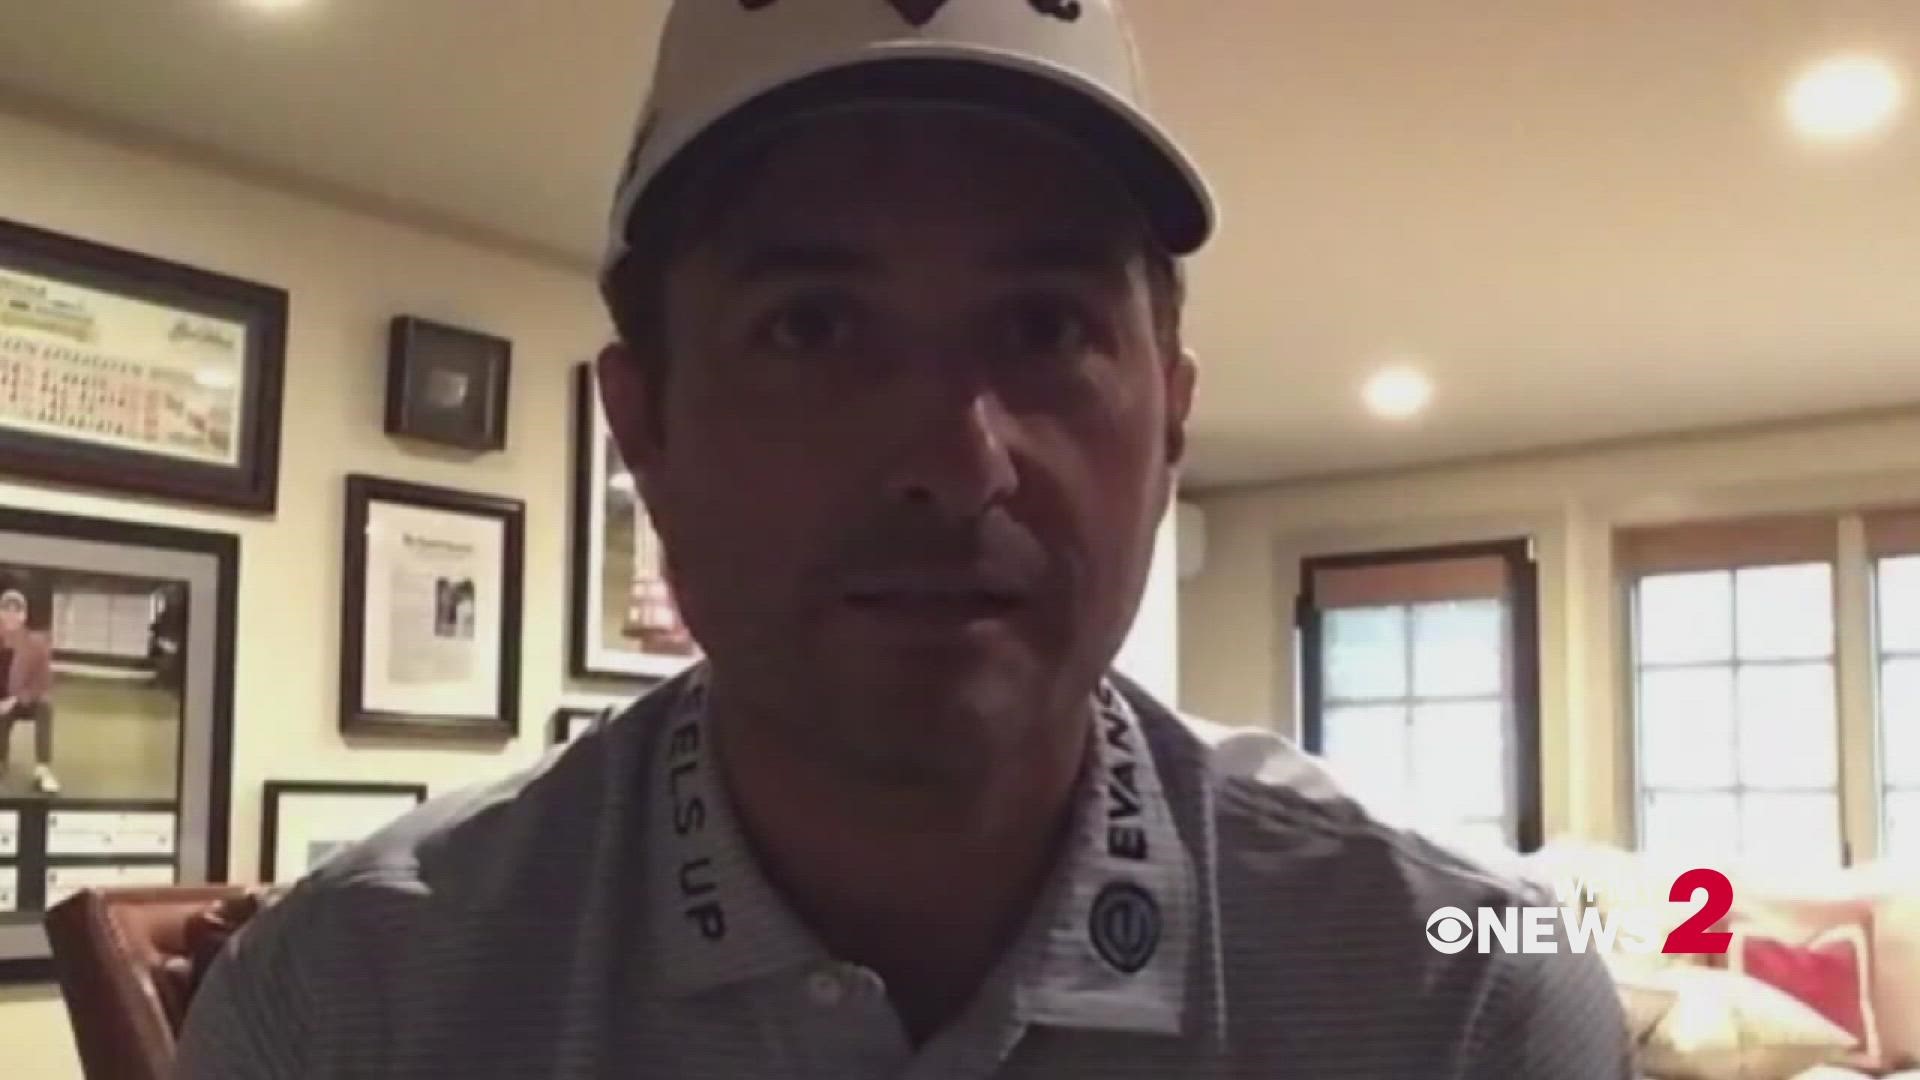 Kisner made a birdie on the 2nd playoff hole in 2021 to claim the Sam Snead Cup and his fourth PGA TOUR victory.